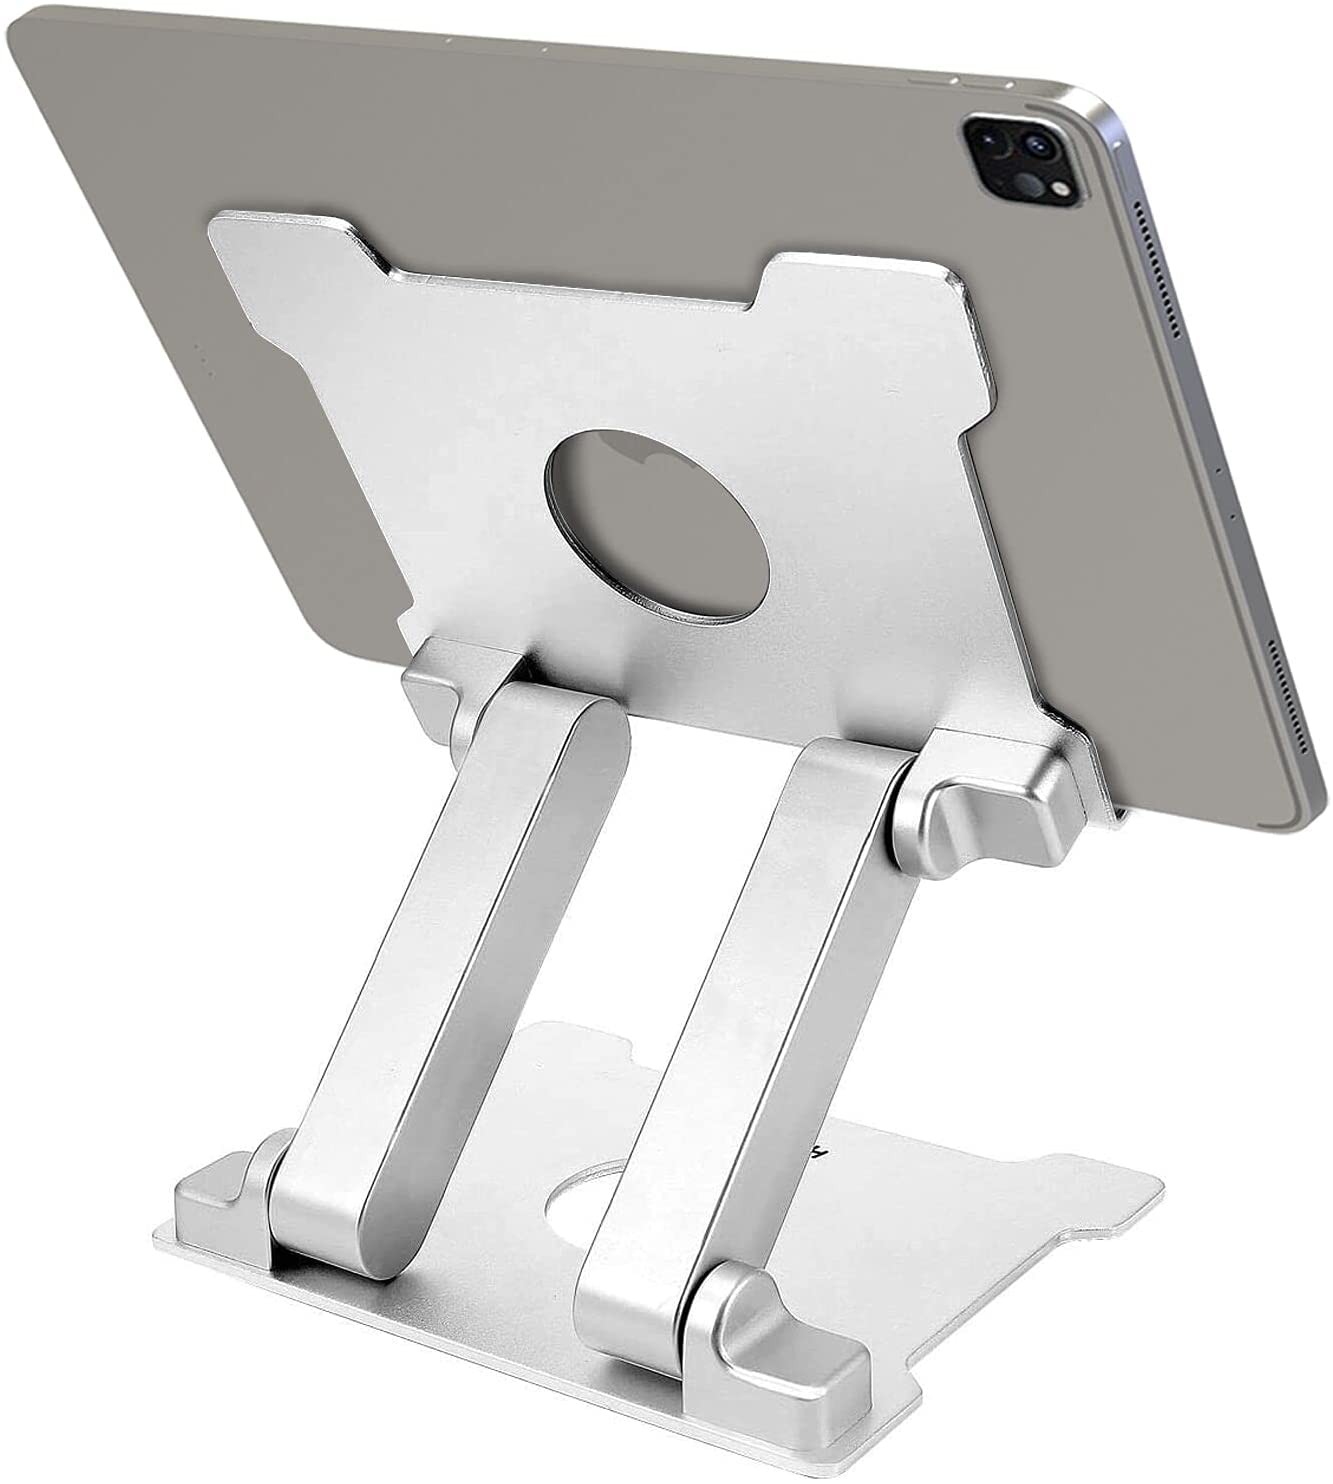 tablet stand - Kabcon T27 Foldable Tablet Stand